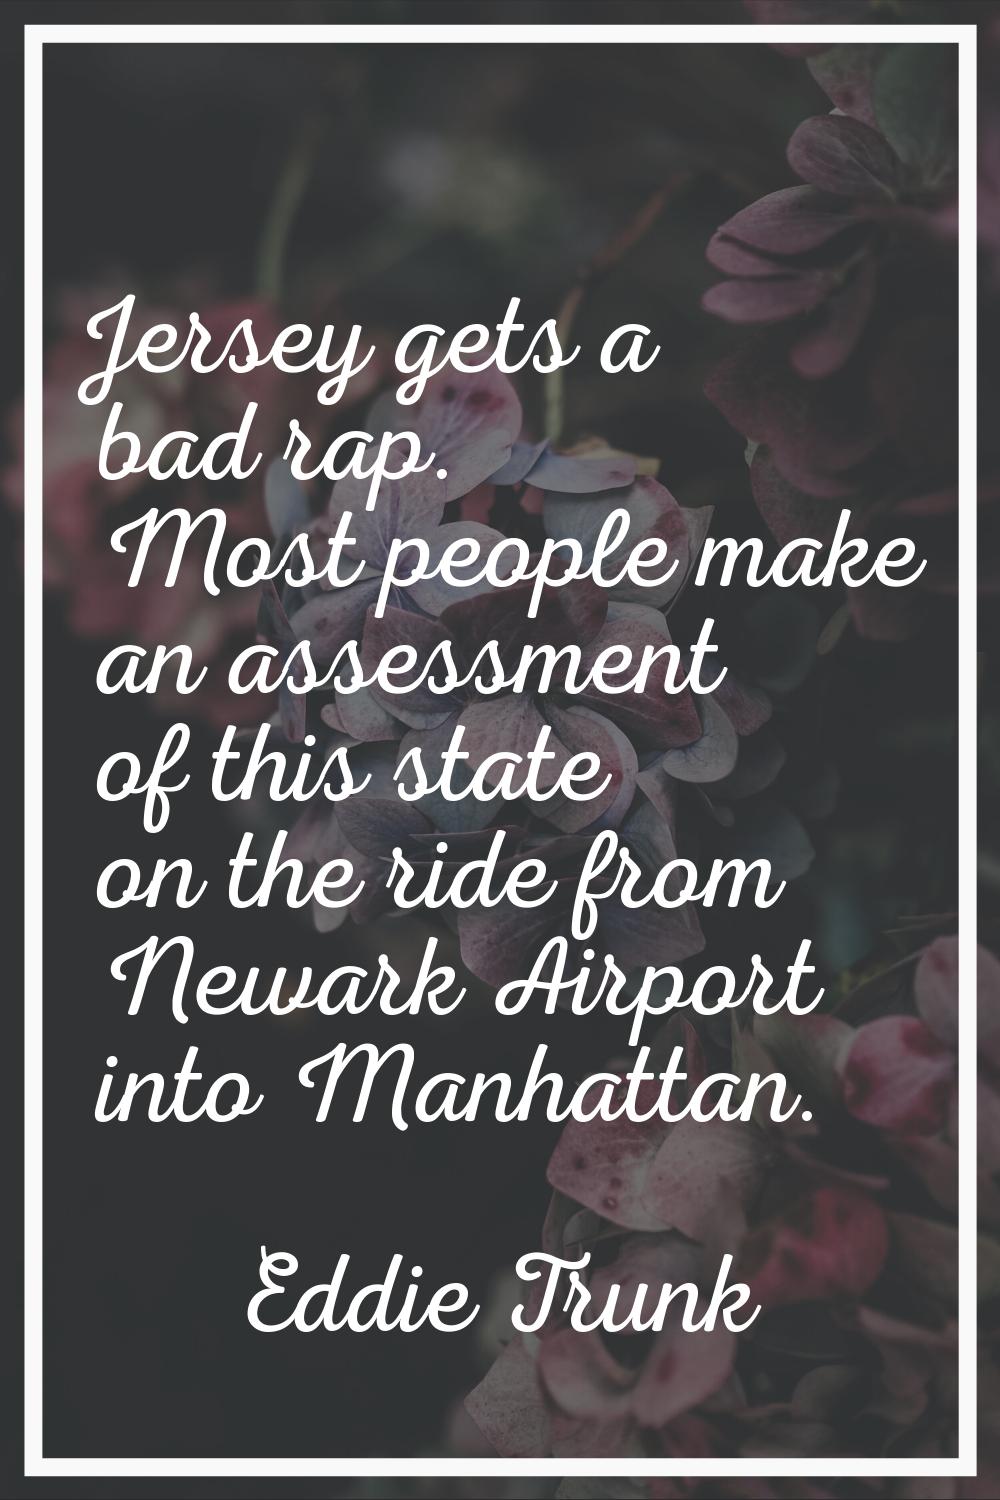 Jersey gets a bad rap. Most people make an assessment of this state on the ride from Newark Airport